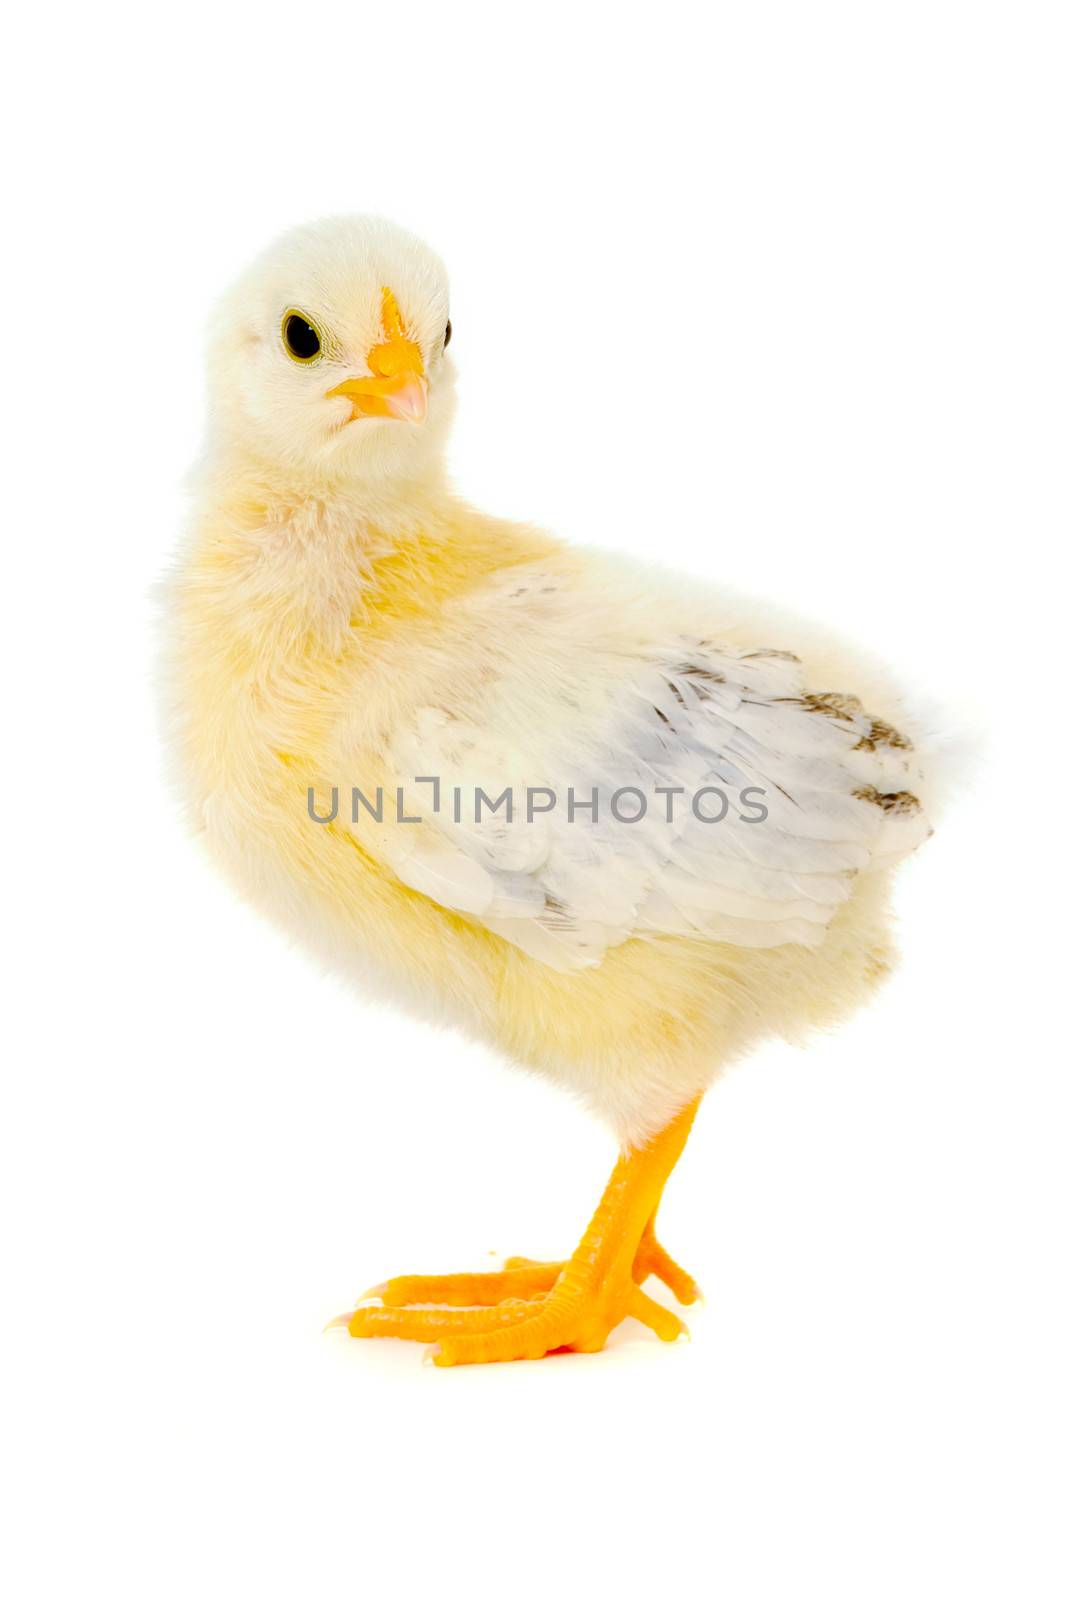 Angry baby chicken is standing on a clean white background.